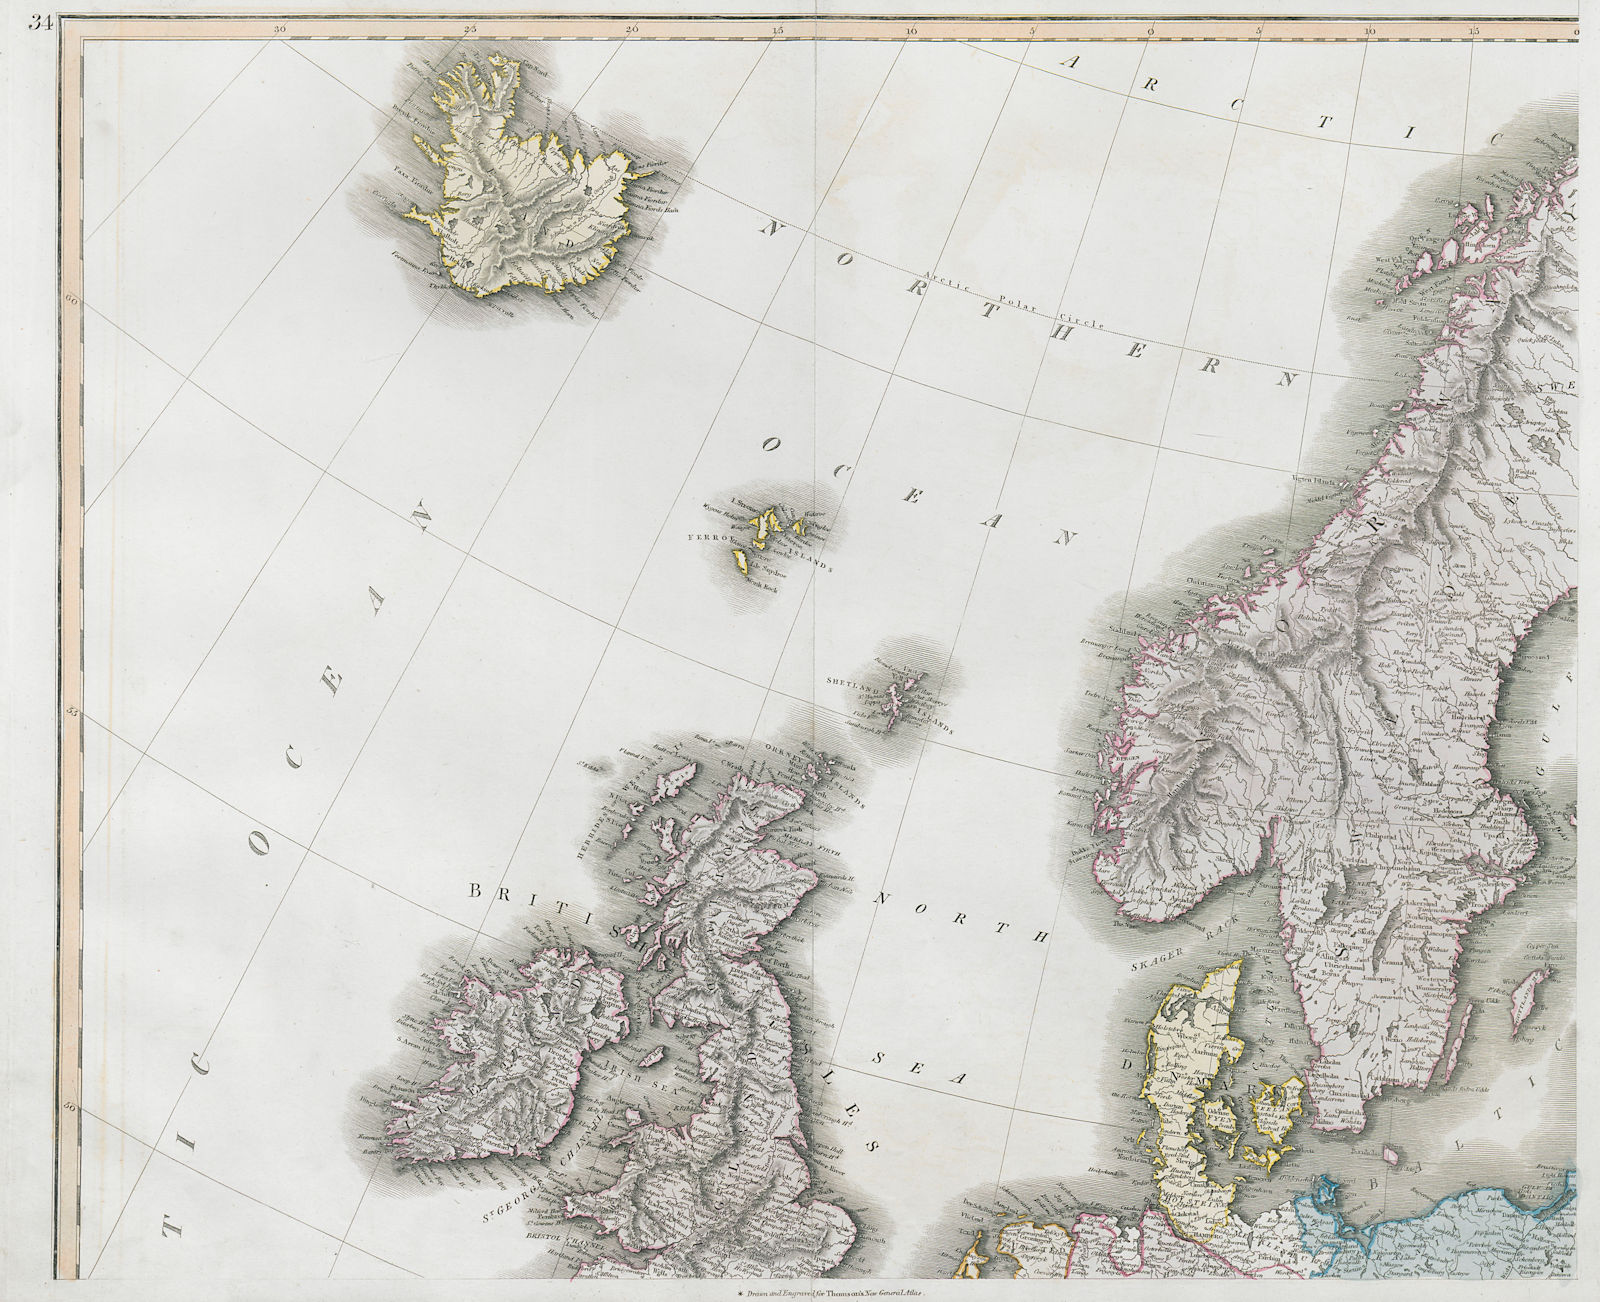 Associate Product North-west Europe. Nordic Countries. British Isles Scandinavia. THOMSON 1830 map